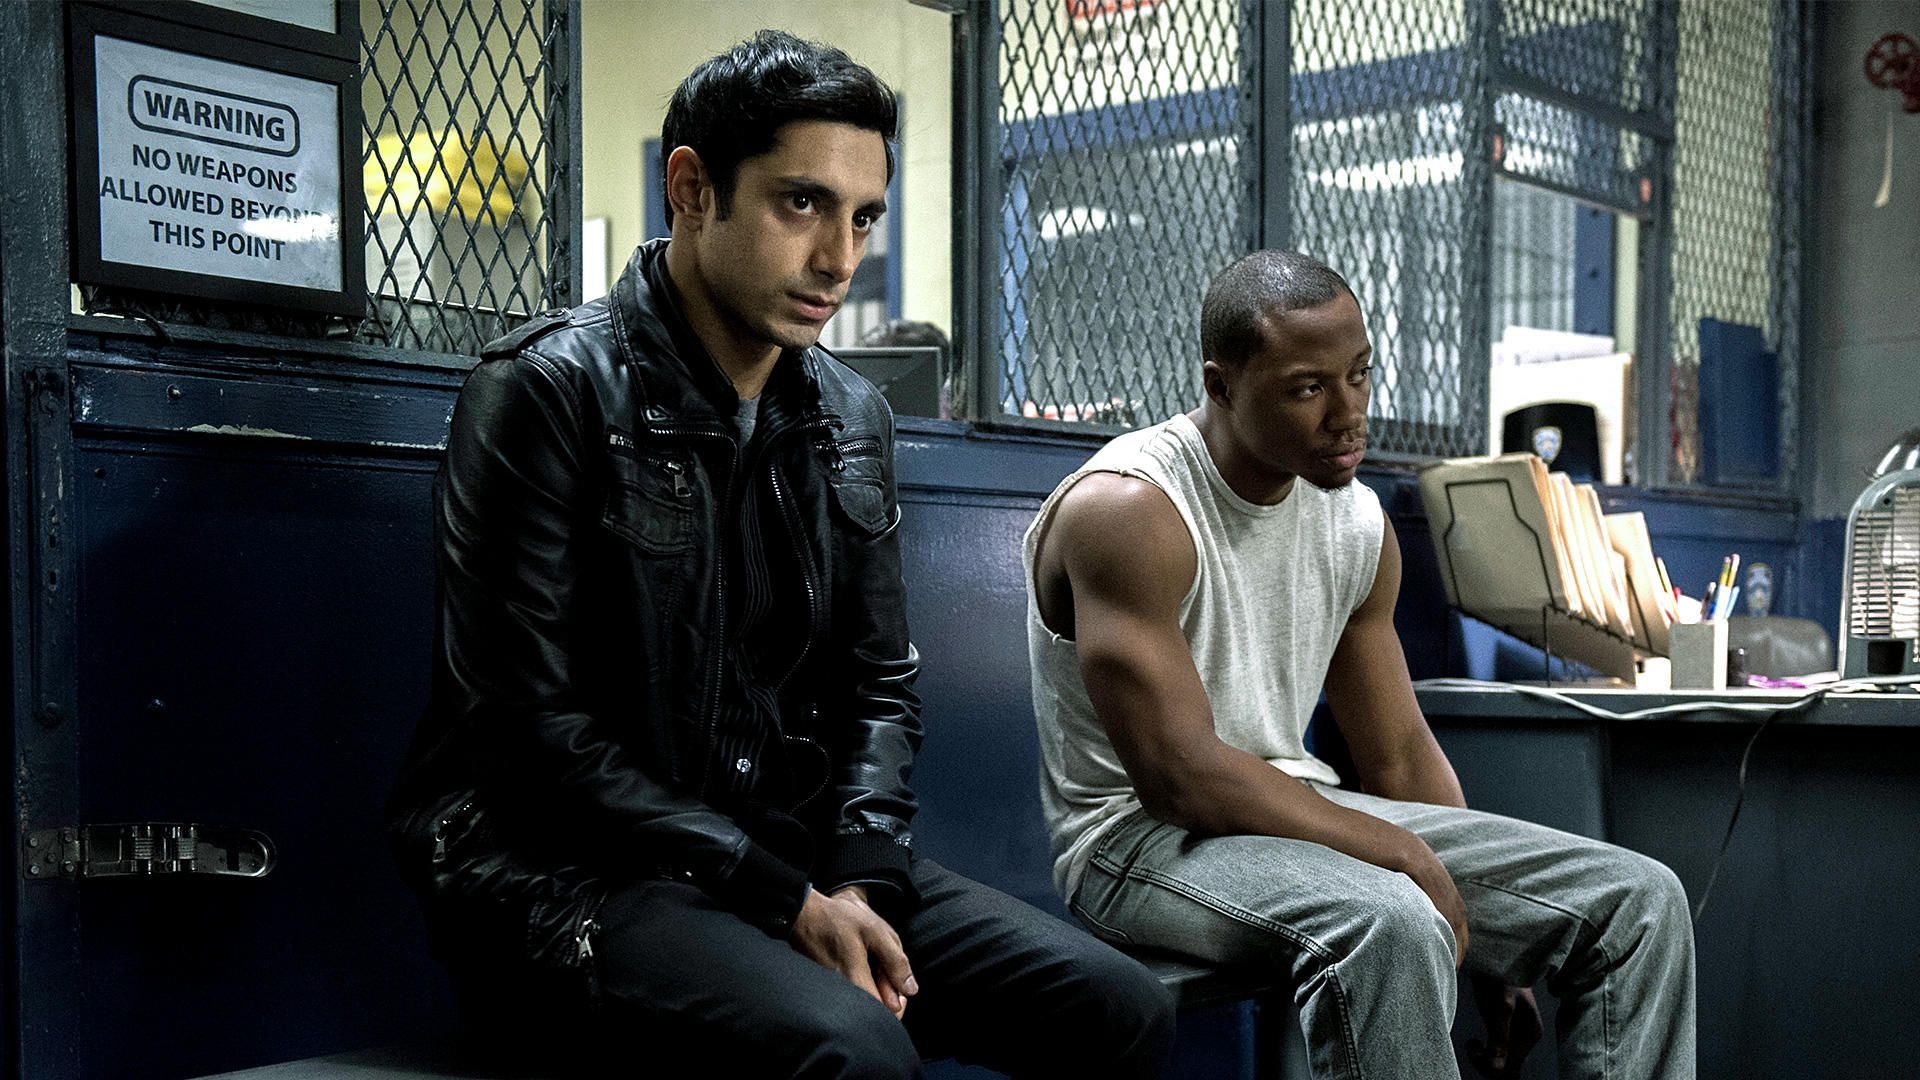 Riz Ahmed, The Others movie, Crime drama, HBO, 1920x1080 Full HD Desktop